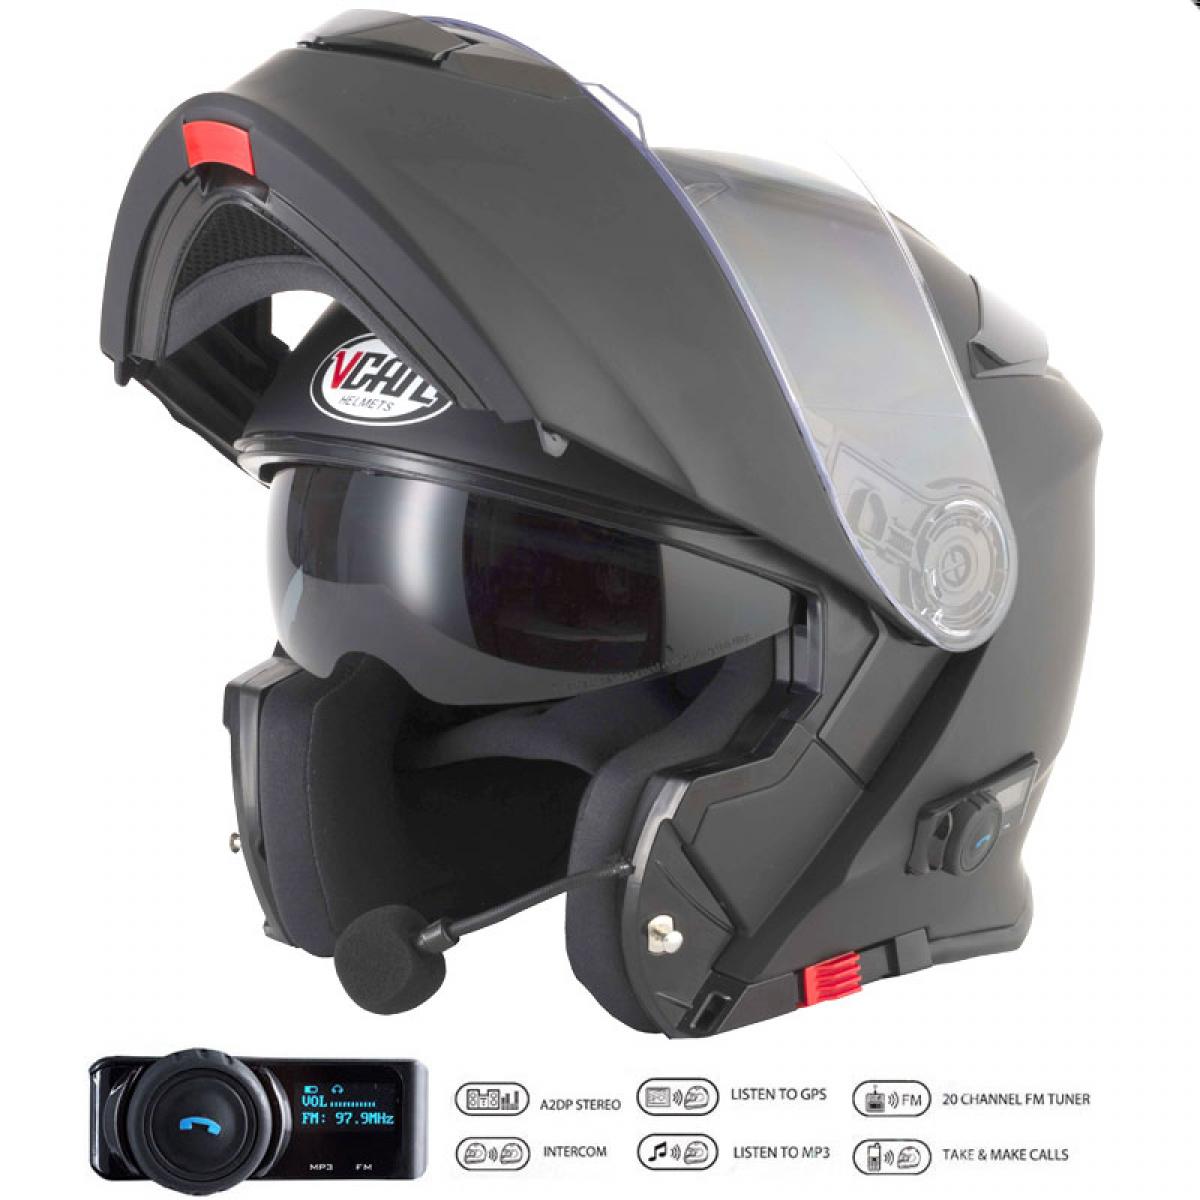 VCAN V271 flip front motorcycle helmet with integrated Bluetooth Comms ...